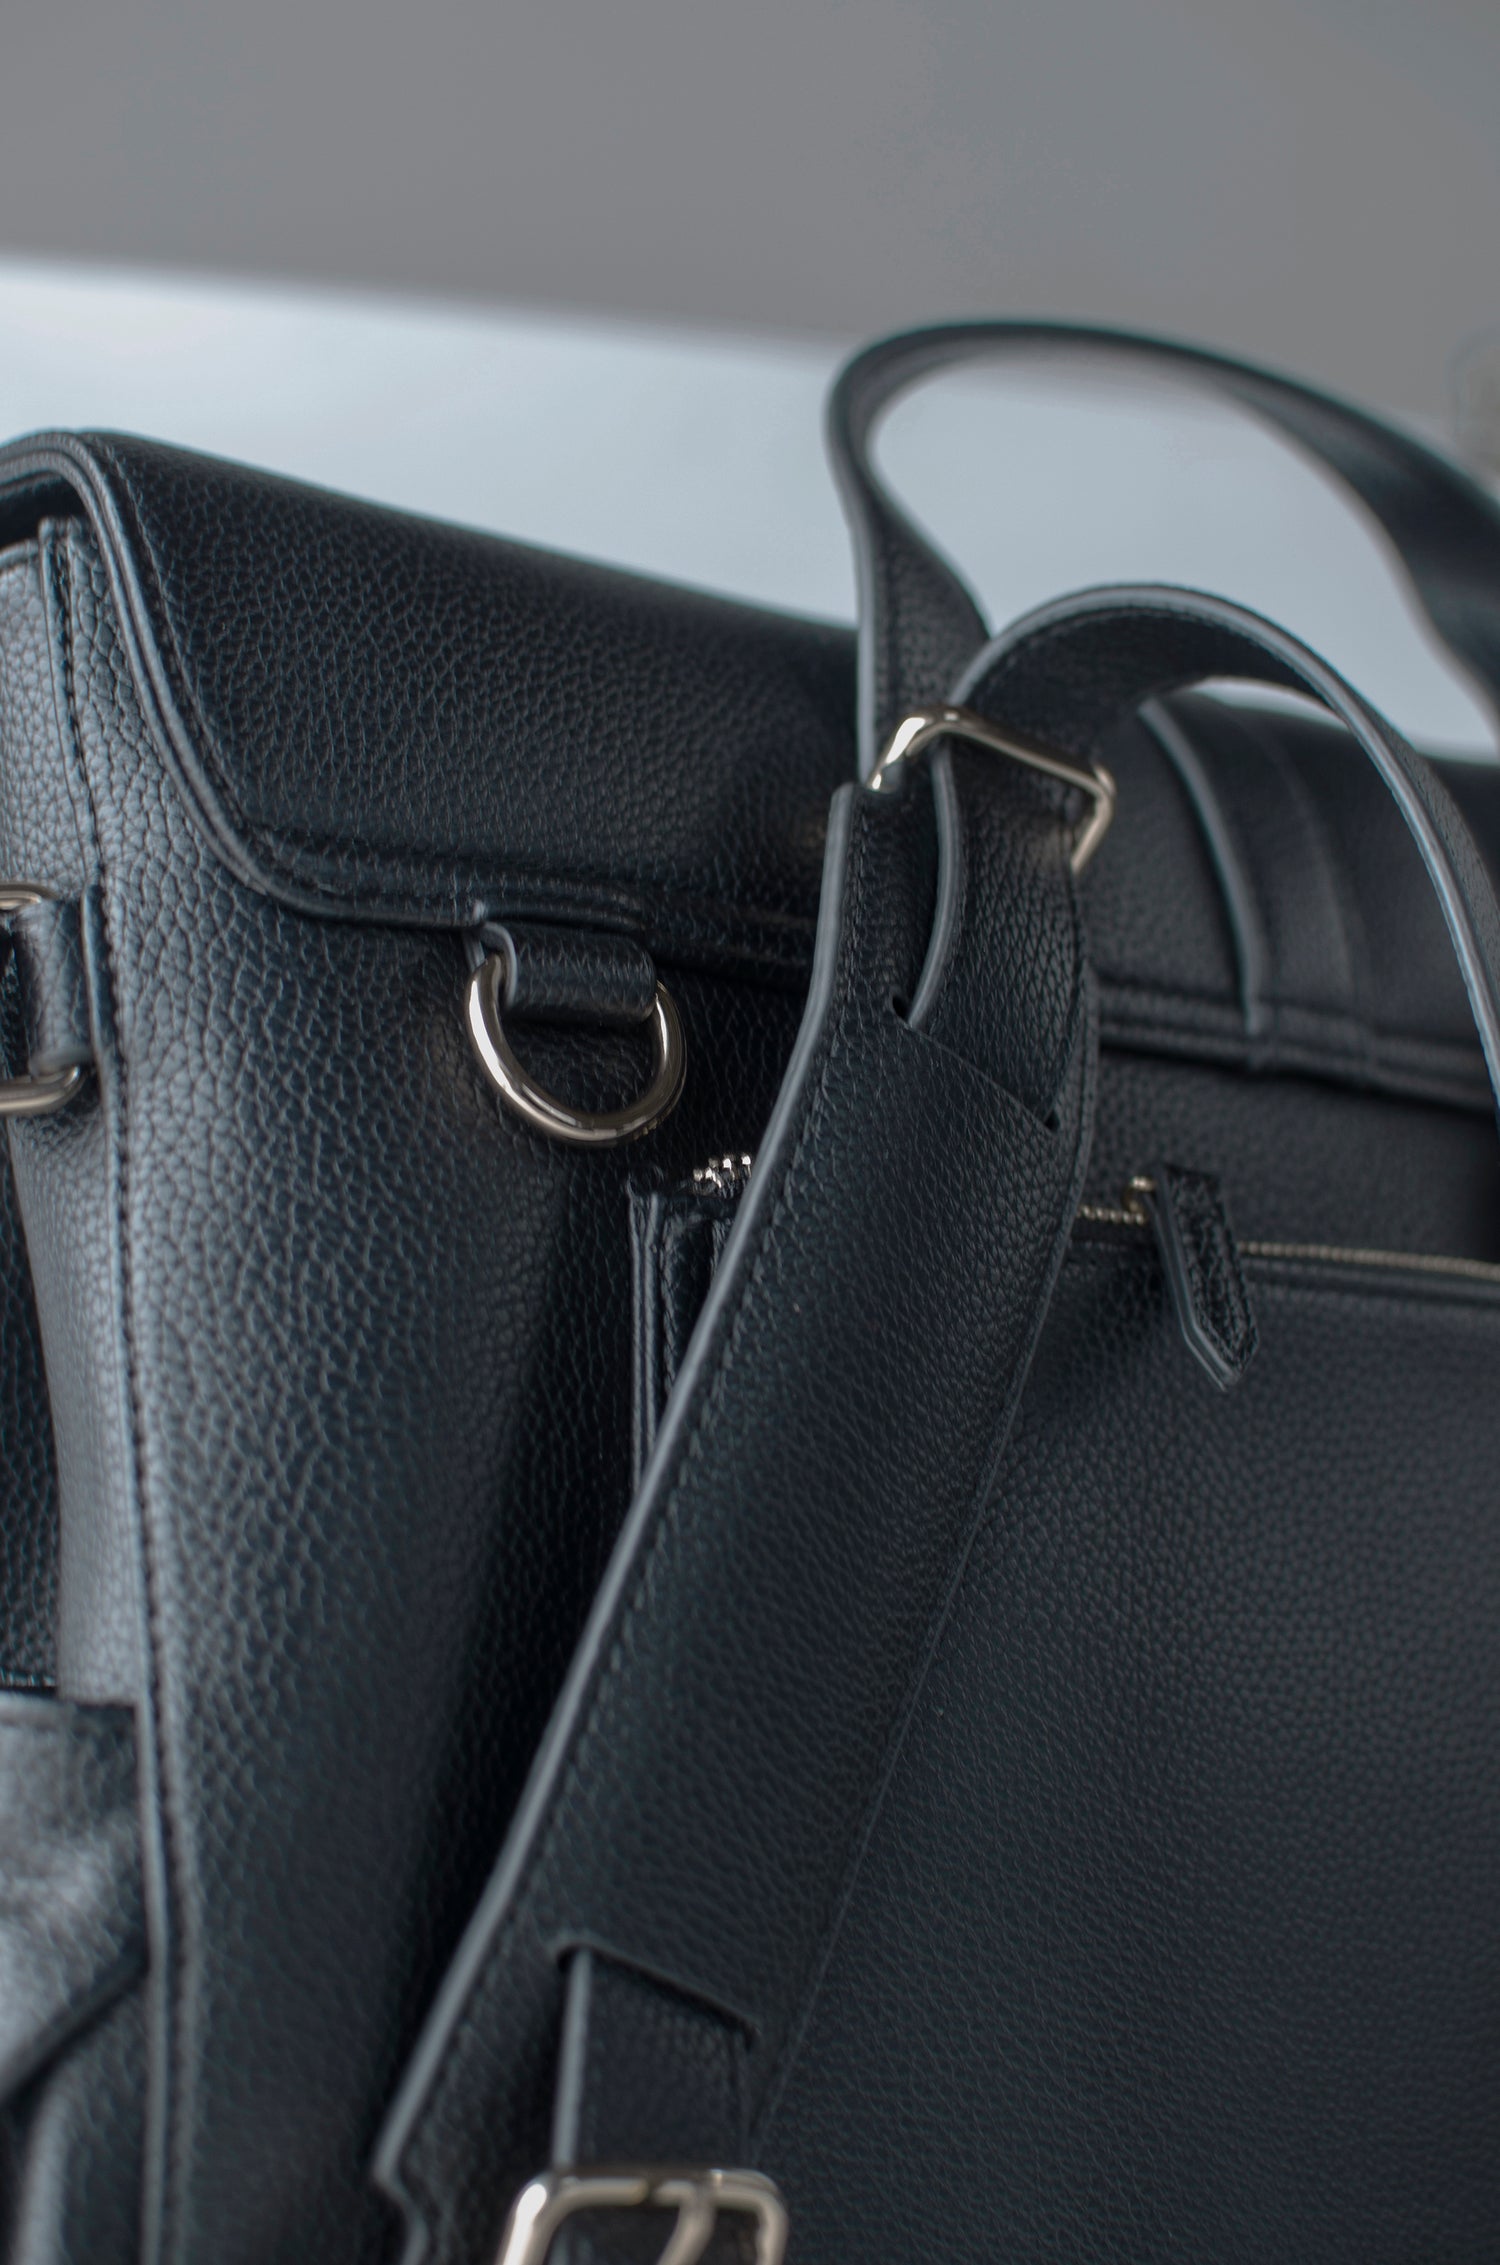 Zoomed-in shot of an After Story luxury accessory, showcasing the high-quality materials and sophisticated craftsmanship, ideal for business travelers seeking style and functionality